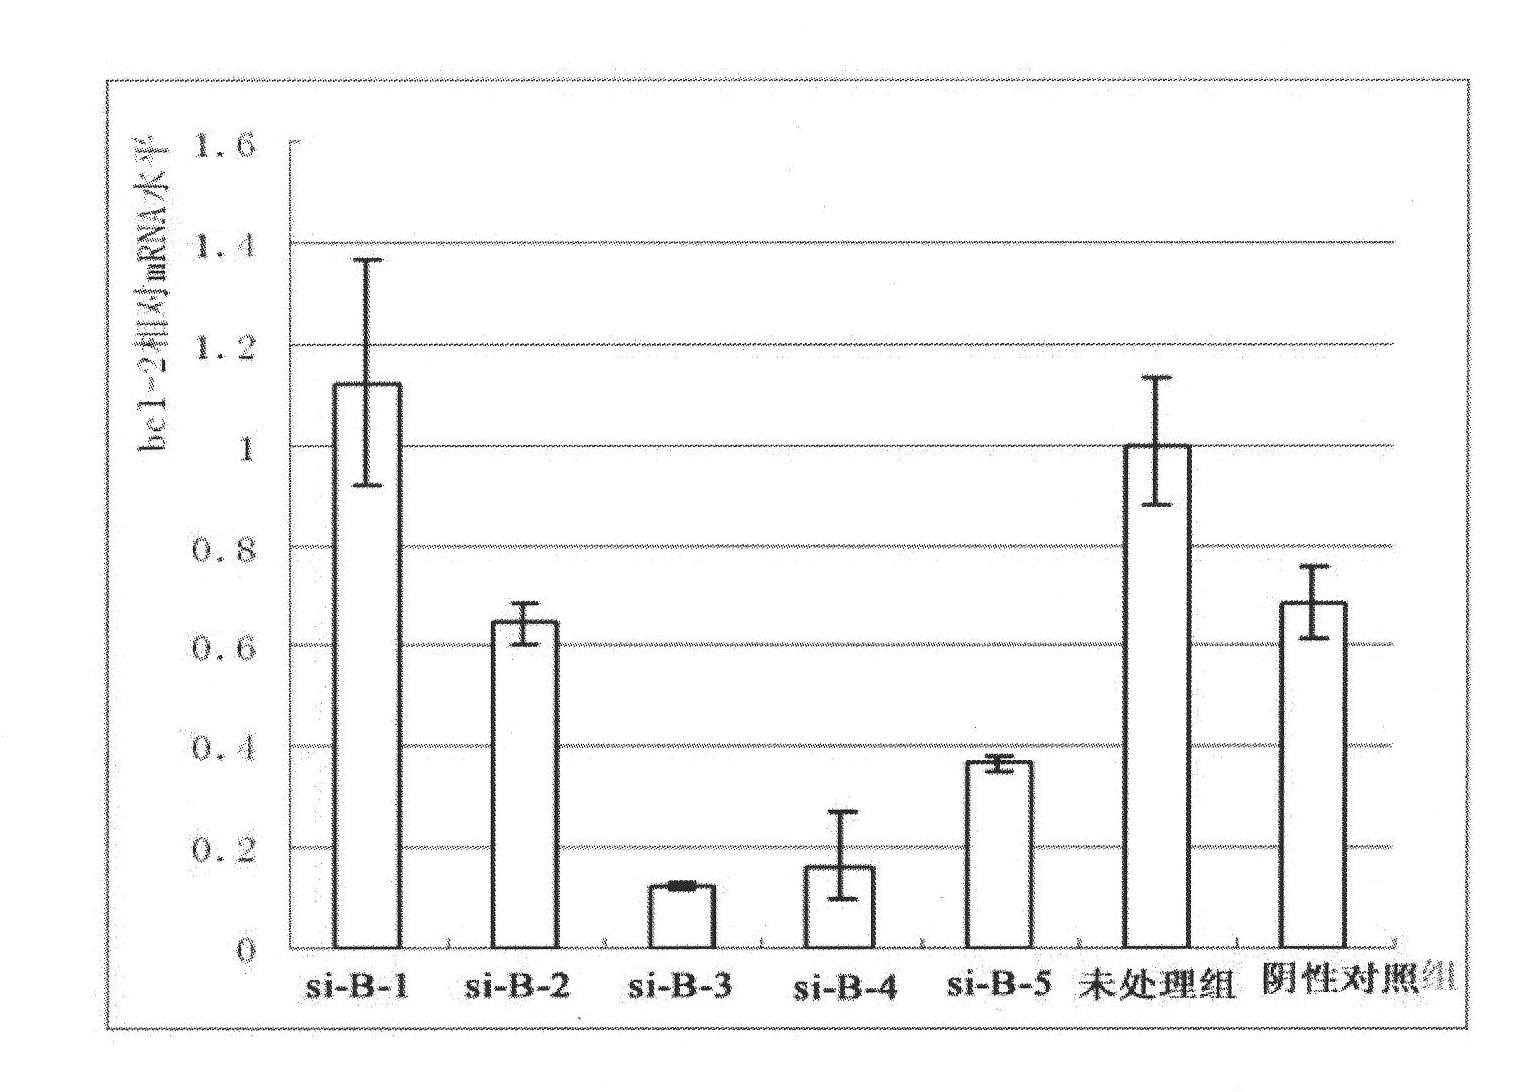 SiRNA molecule for interfering expression of Bcl-2 gene and application thereof